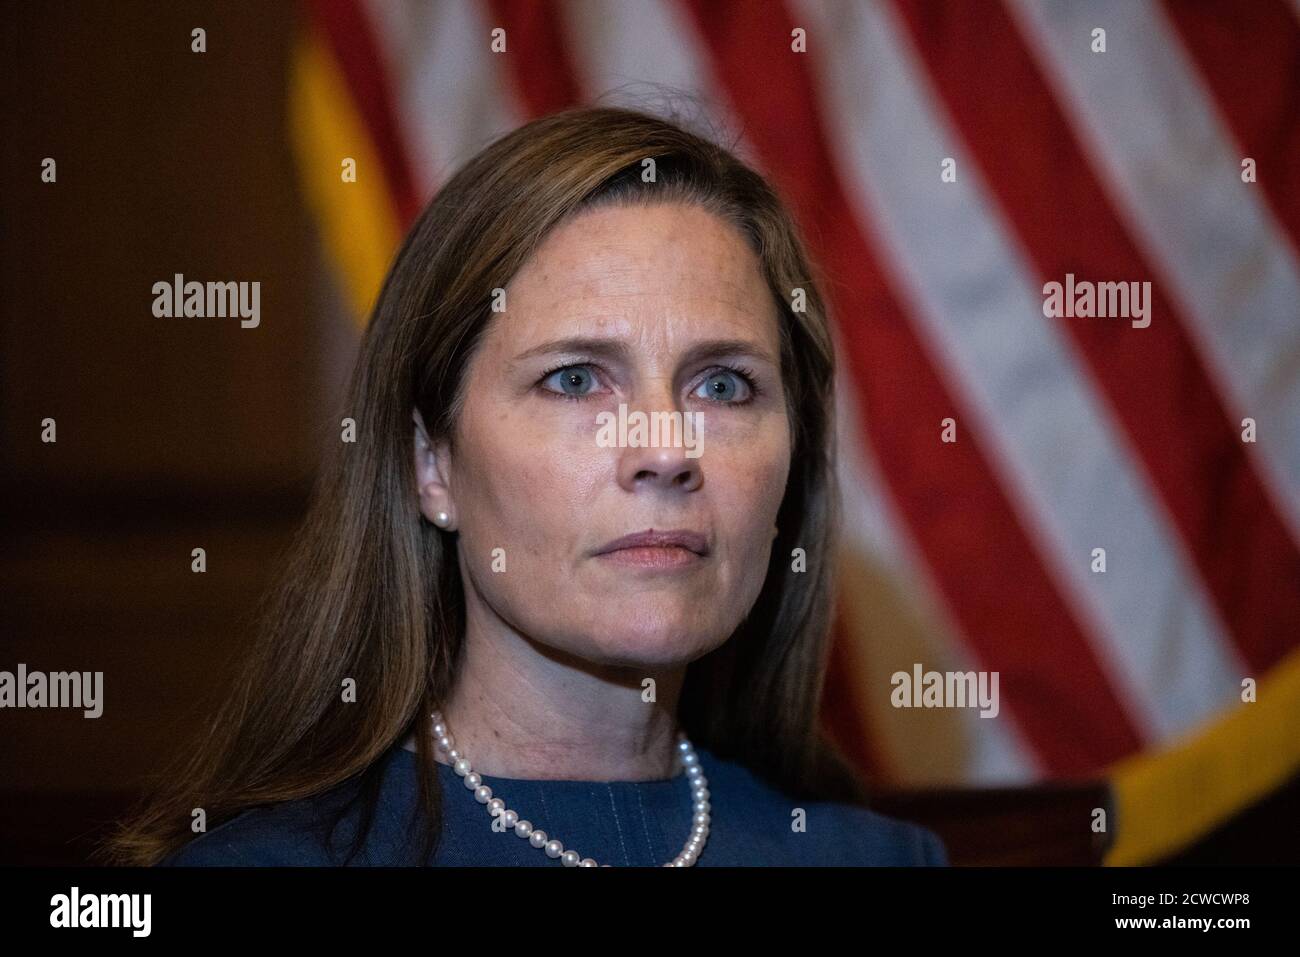 Washington, United States. 29th Sep, 2020. Judge Amy Coney Barrett, President Donald Trump's nominee to the Supreme Court, meets with Republican Senators at the Capitol in Washington, DC on Tuesday, September 29, 2020. The Senate confirmation hearings begin on October 12th. Pool photo by Graeme Jennings/UPI Credit: UPI/Alamy Live News Stock Photo